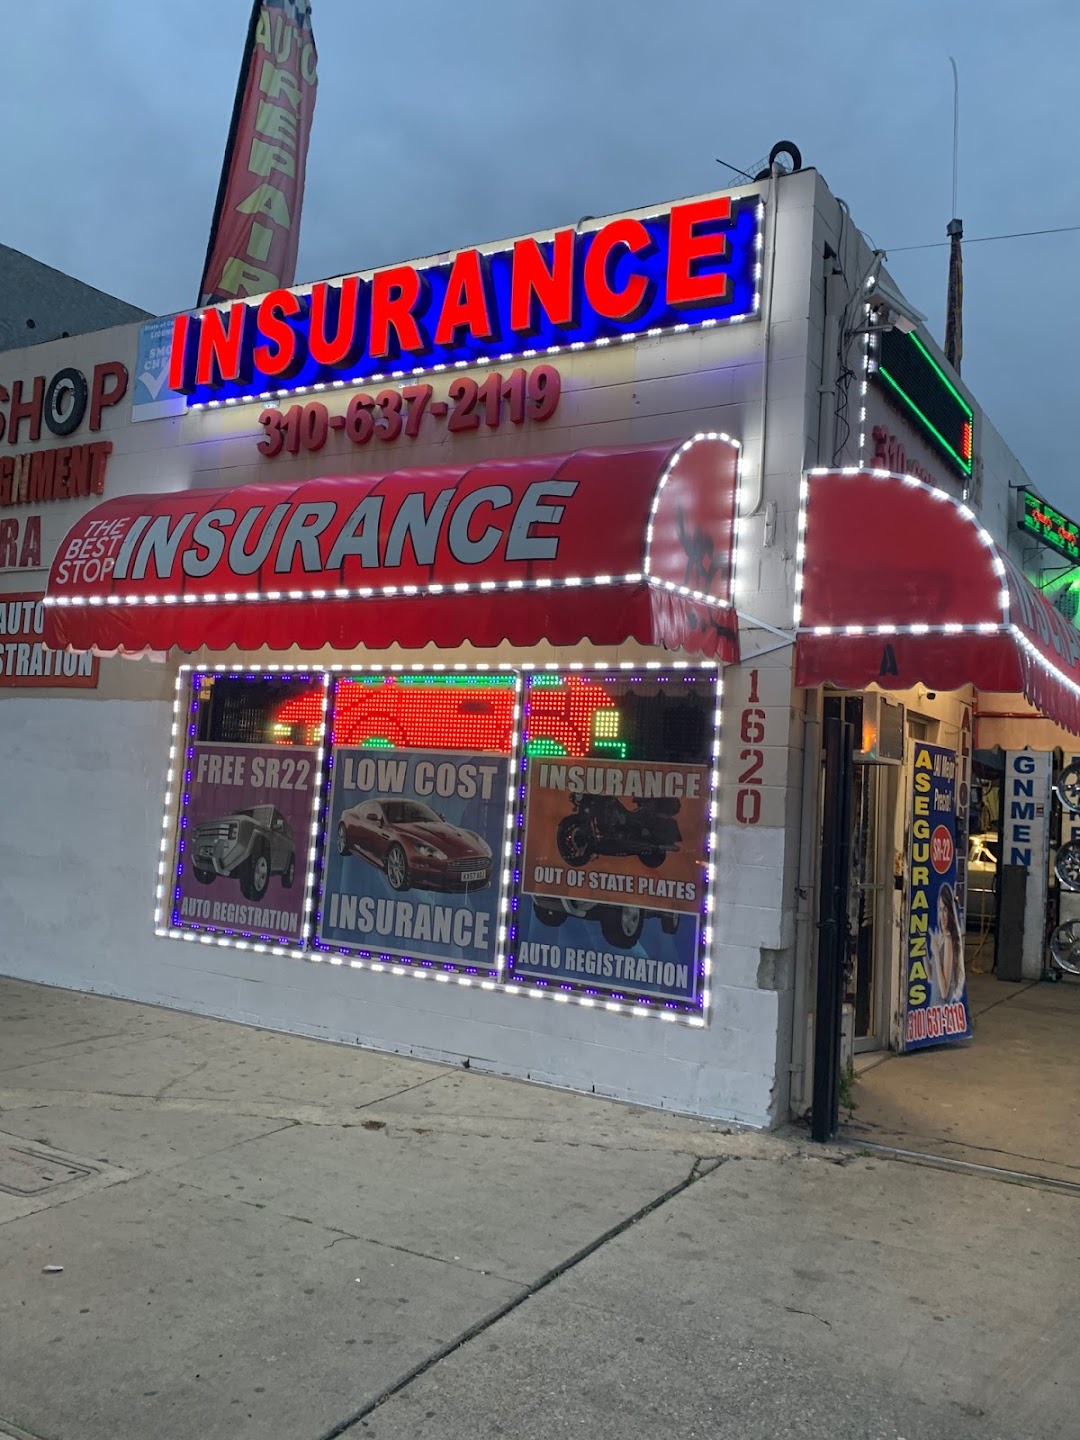 The Best Stop Insurance